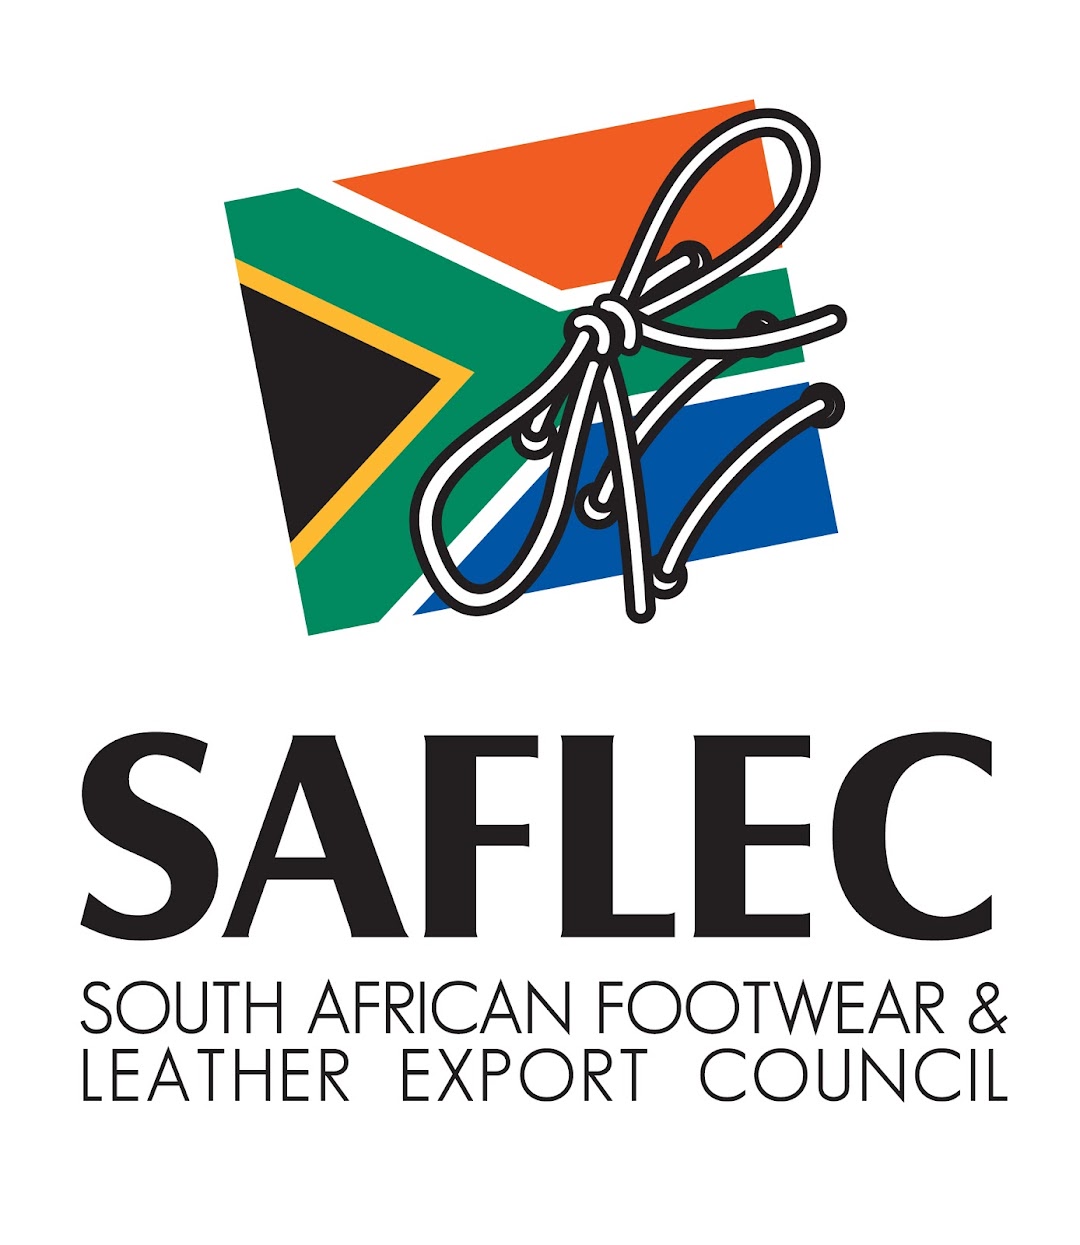 SAFLEC SOUTH AFRICAN FOOTWEAR & LEATHER EXPORT COUNCIL